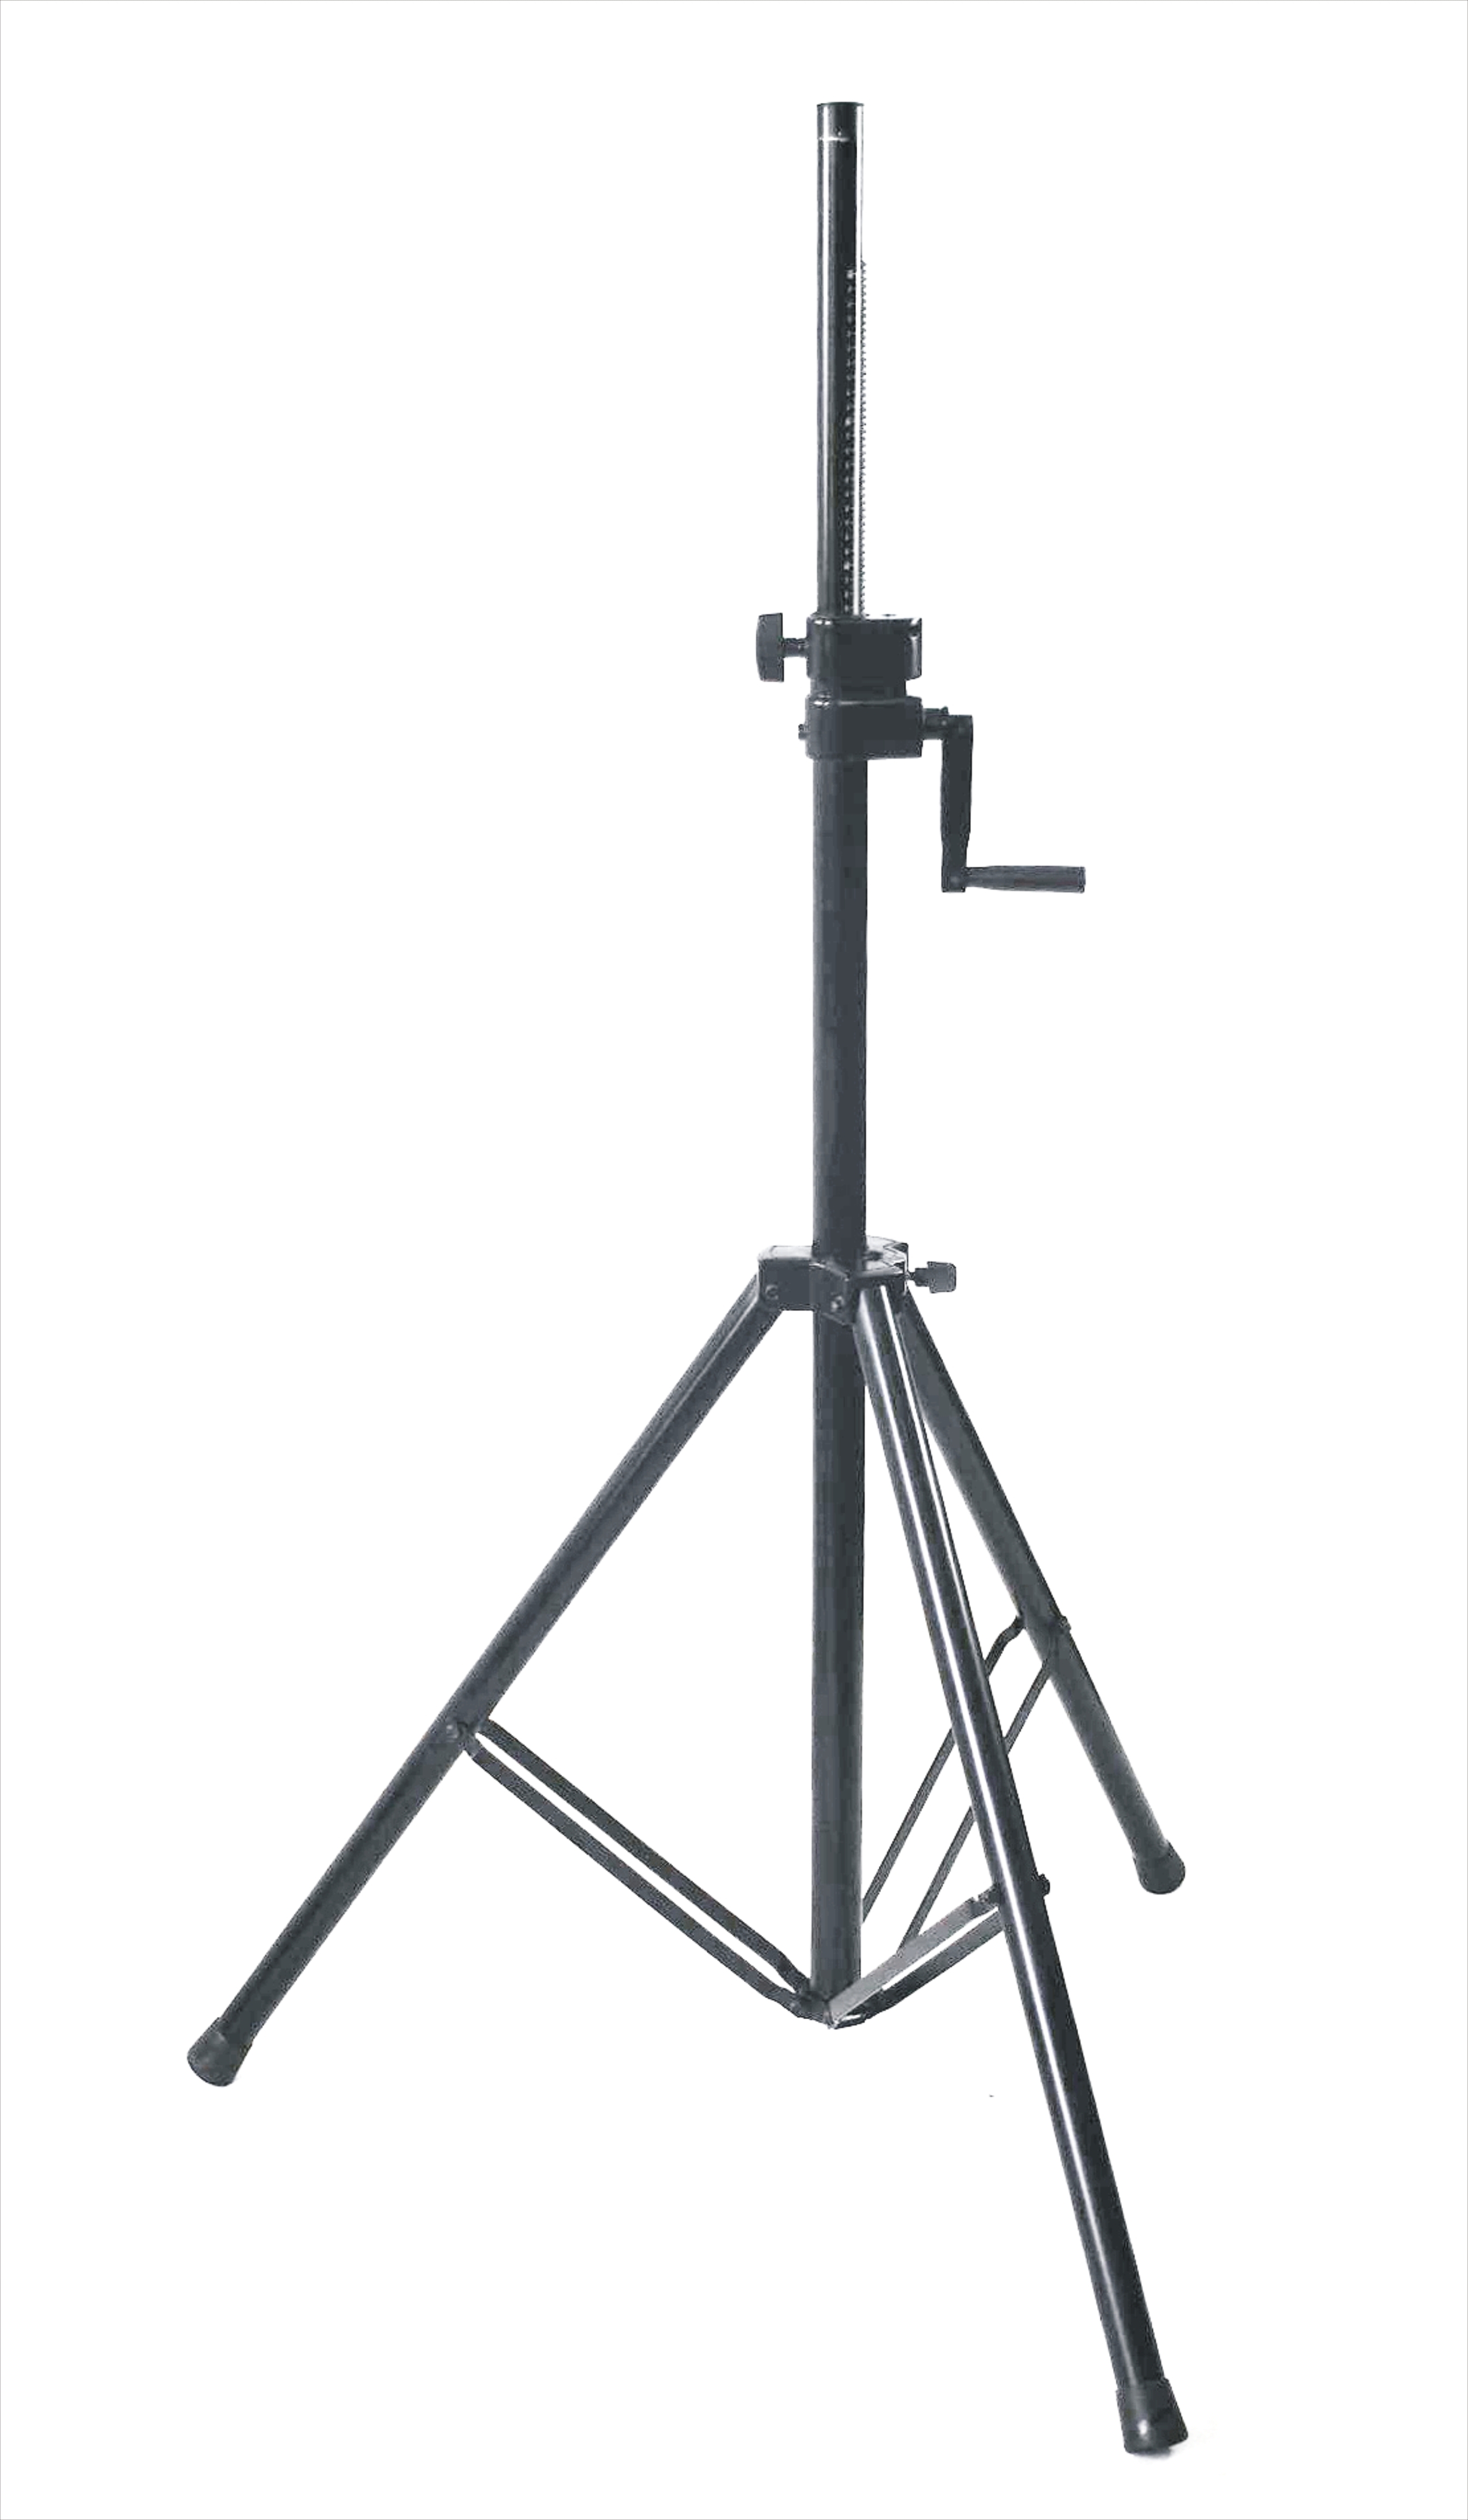 Power Sps700 - Speaker stand - Main picture